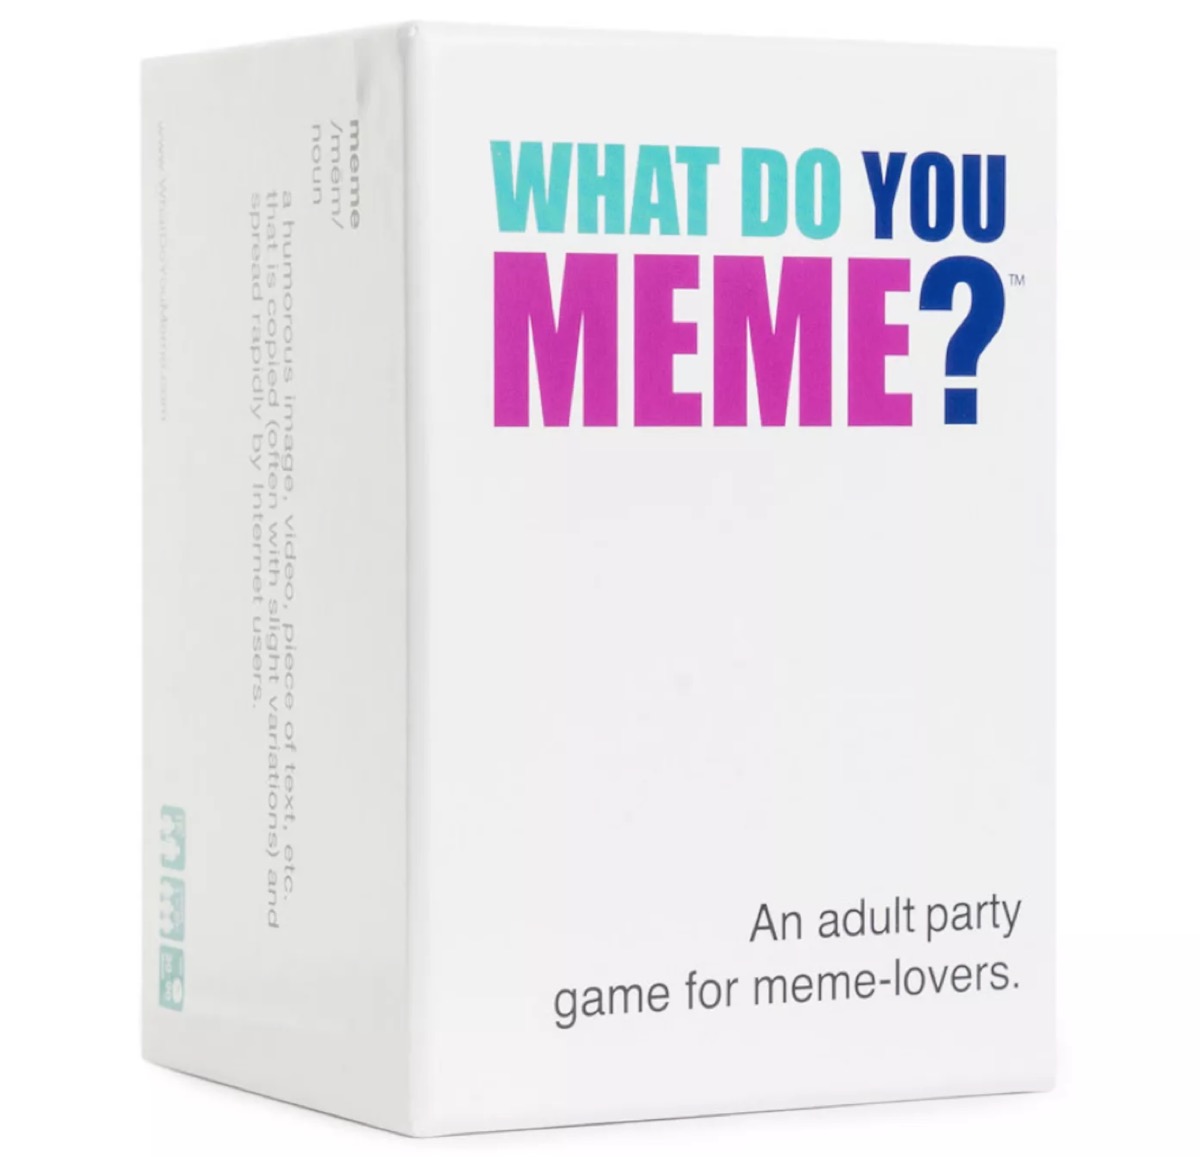 what do you meme game in white box